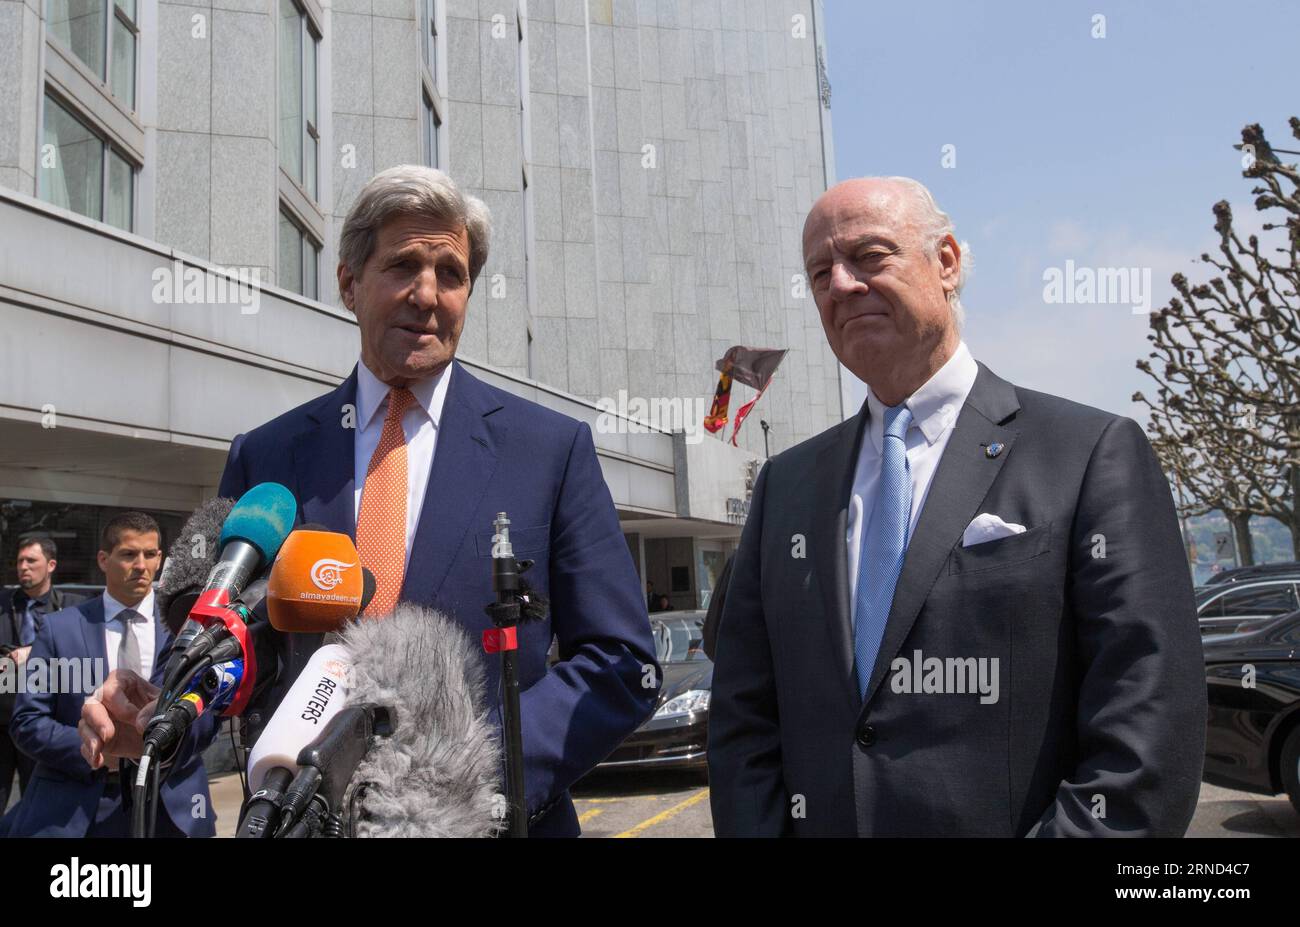 (160502) -- GENEVA, May 2, 2016 -- U.S. Secretary of State John Kerry (L) and UN Special Envoy for Syria Staffan de Mistura hold a press conference after their meeting in a hotel in Geneva, Switzerland, May 2, 2016. U.S. Secretary of State John Kerry on Monday urged all parties to the Syrian conflict to end violence and restore the cessation of hostilities during his second day trip here for talks focusing on the Syrian situation. ) SWITZERLAND-GENEVA-SYRIAN CONFLICT-US-KERRY XuxJinquan PUBLICATIONxNOTxINxCHN   160502 Geneva May 2 2016 U S Secretary of State John Kerry l and UN Special Envoy f Stock Photo